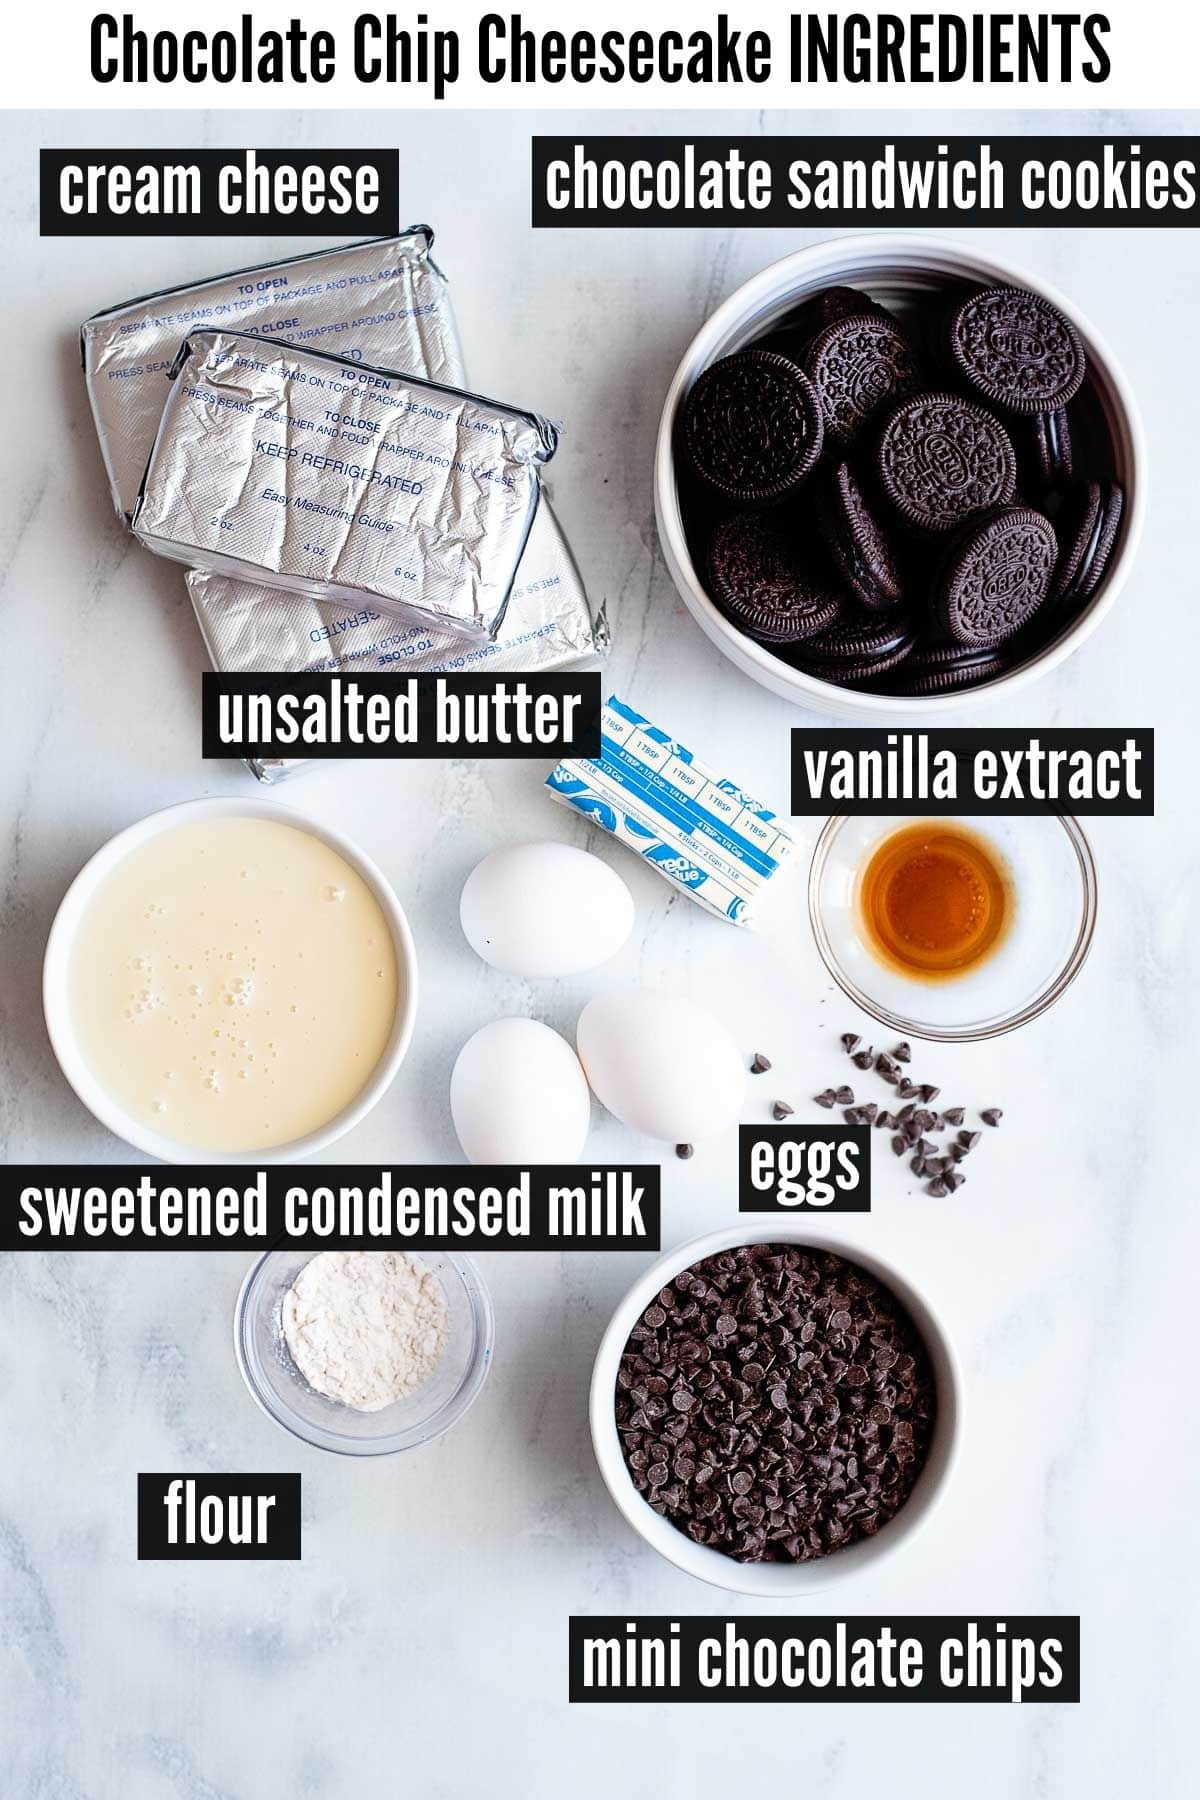 chocolate chip cheesecake labelled ingredients.